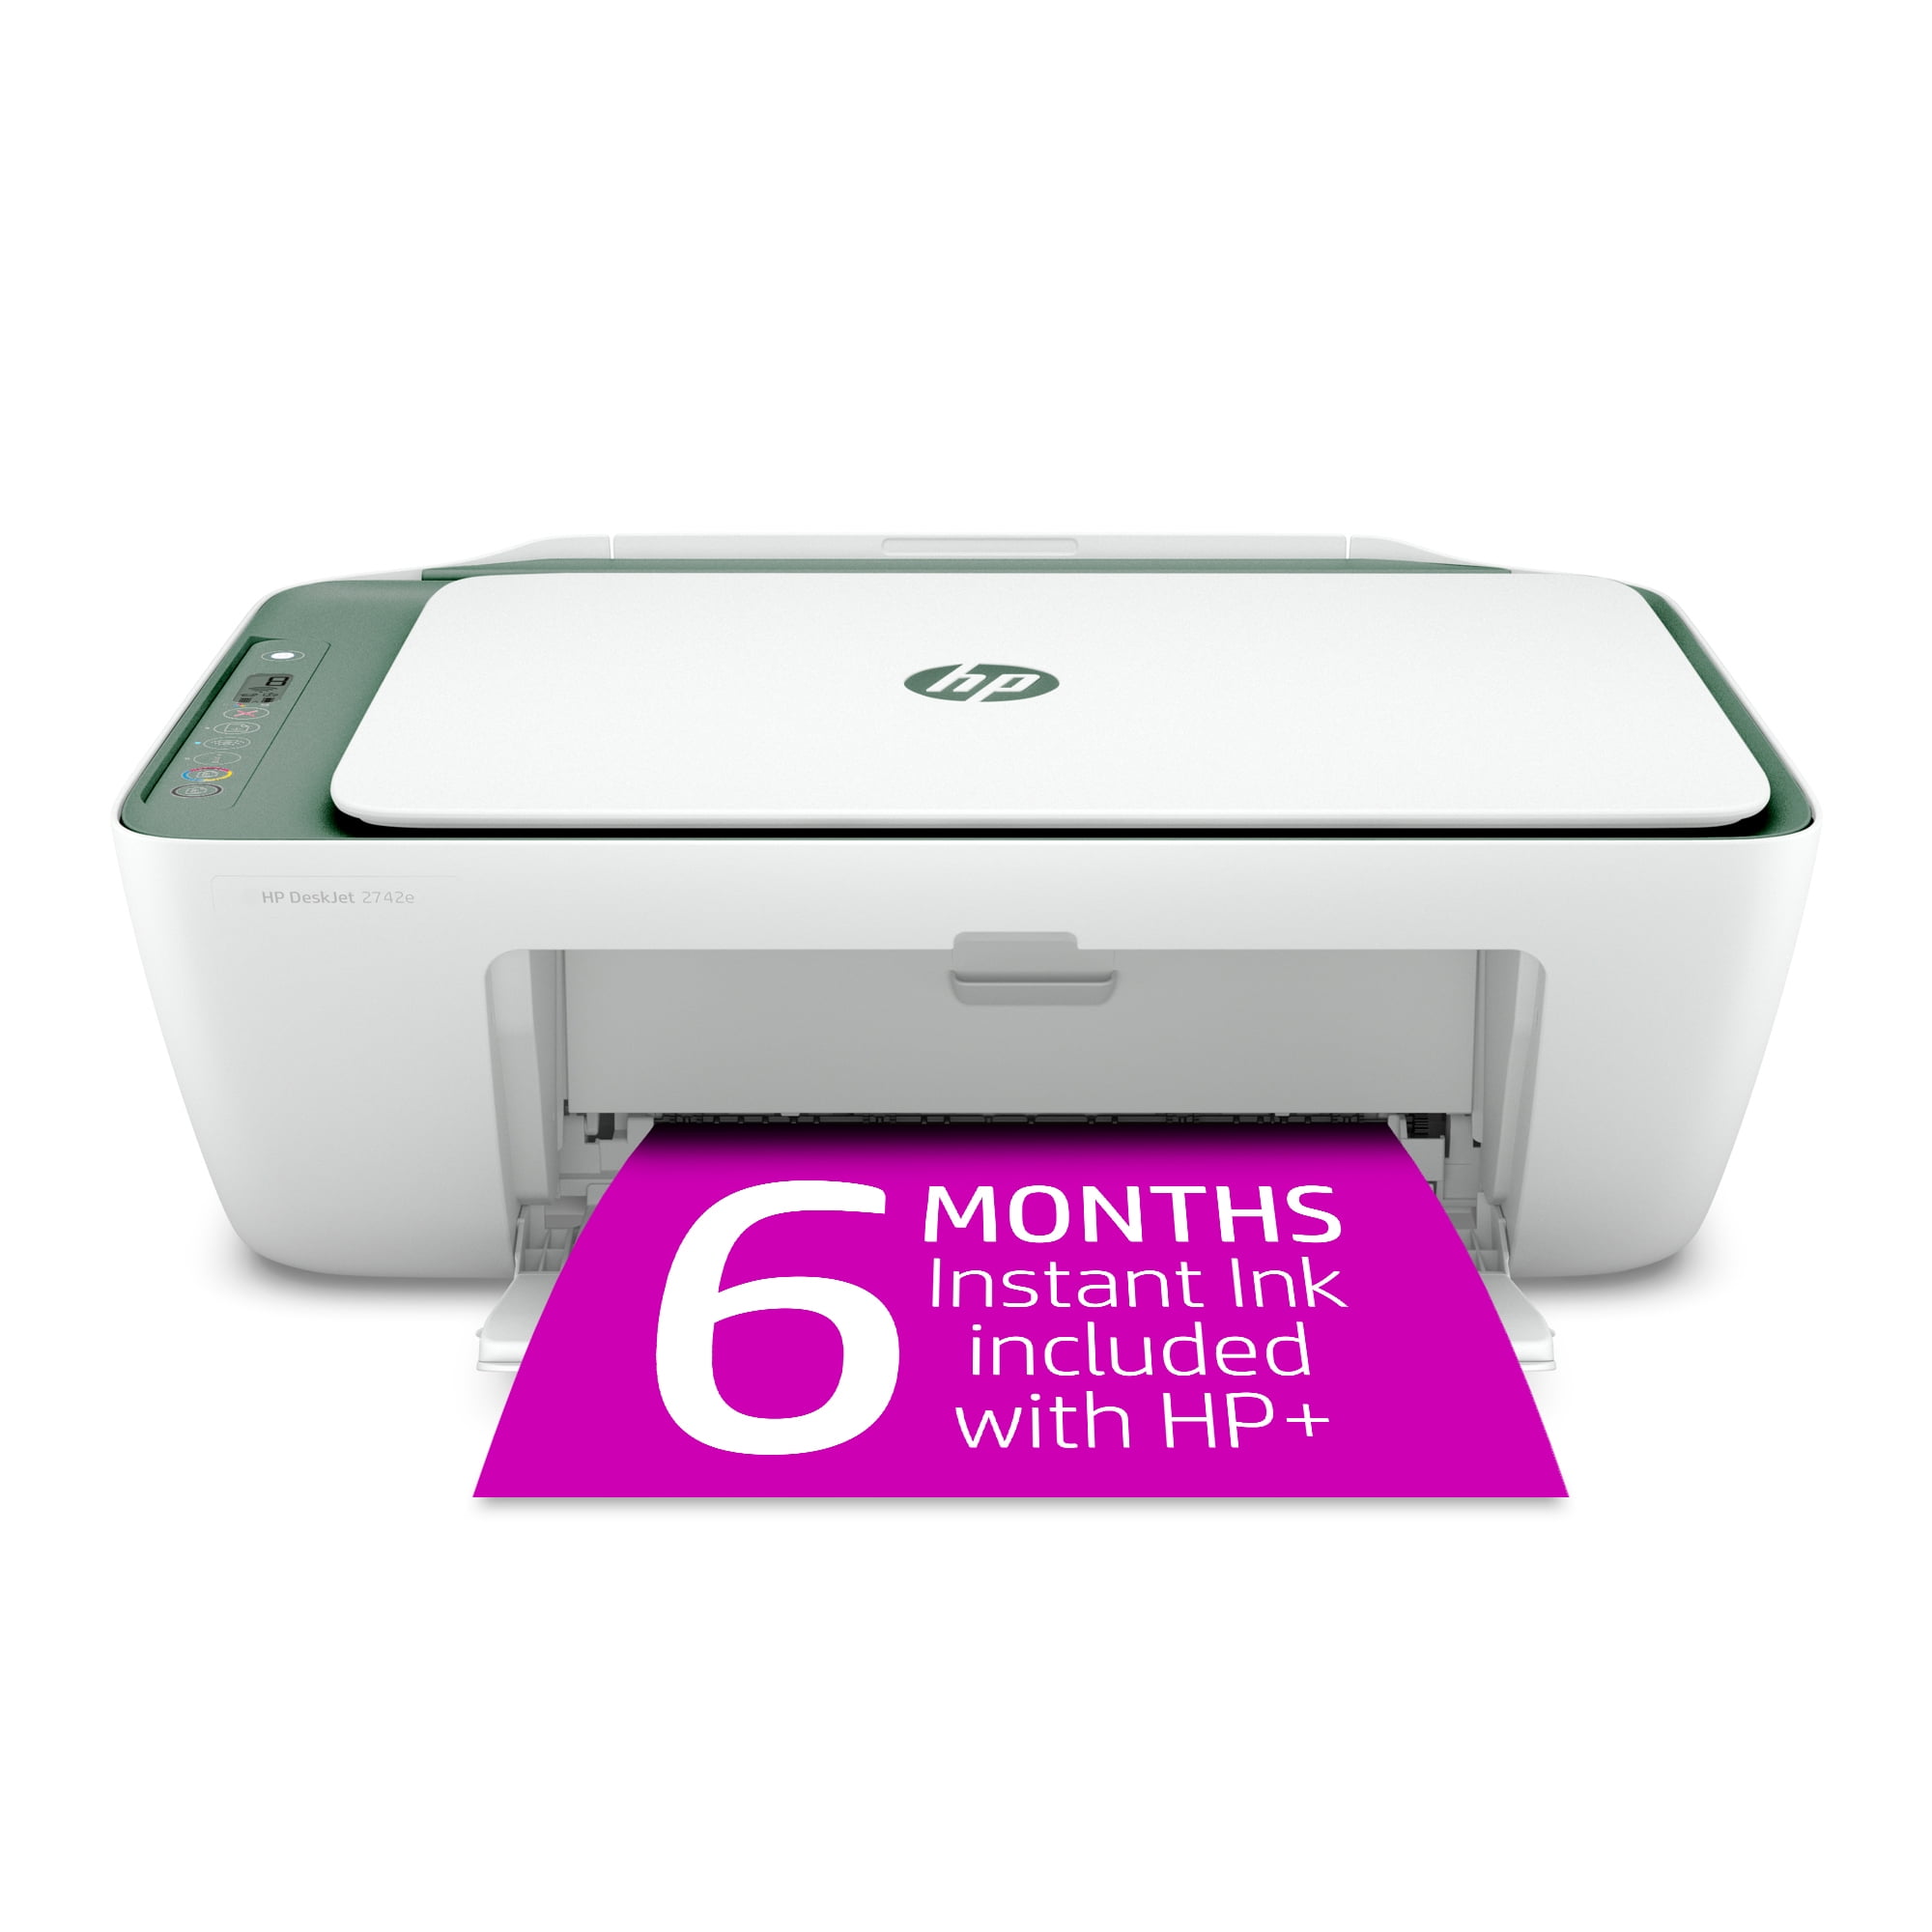 HP DeskJet 2742e Color All-in-One Inkjet Printer (Green Matcha) with 6 months Instant Ink Included with HP+ - Walmart.com